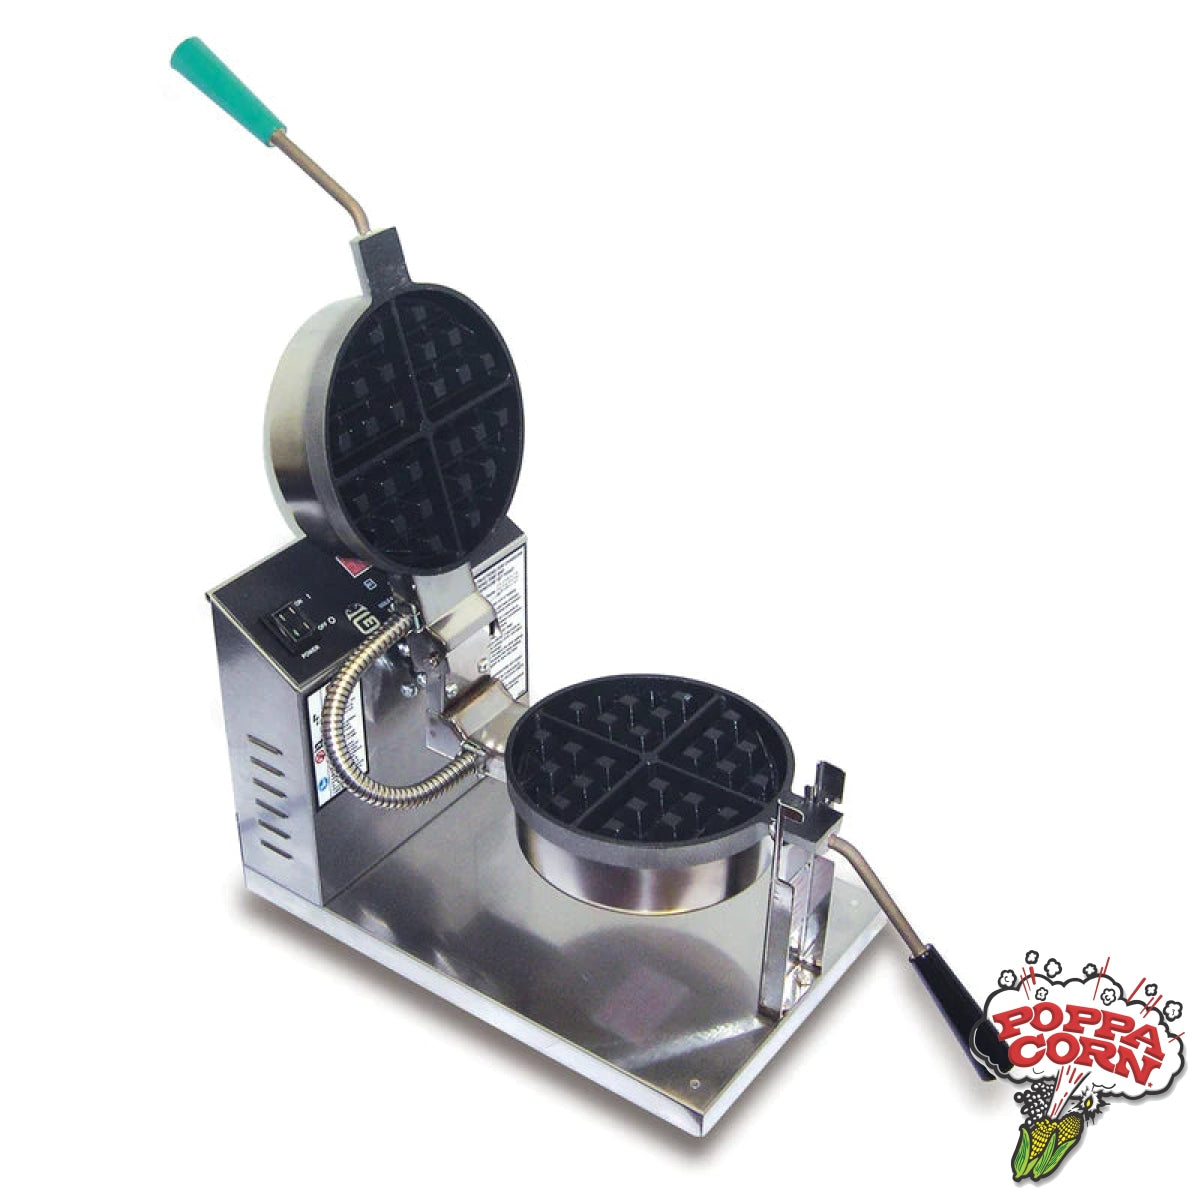 Round Belgian Waffle Baker with Non-stick Coating and Electronic Control - GM5021ET - Poppa Corn Corp